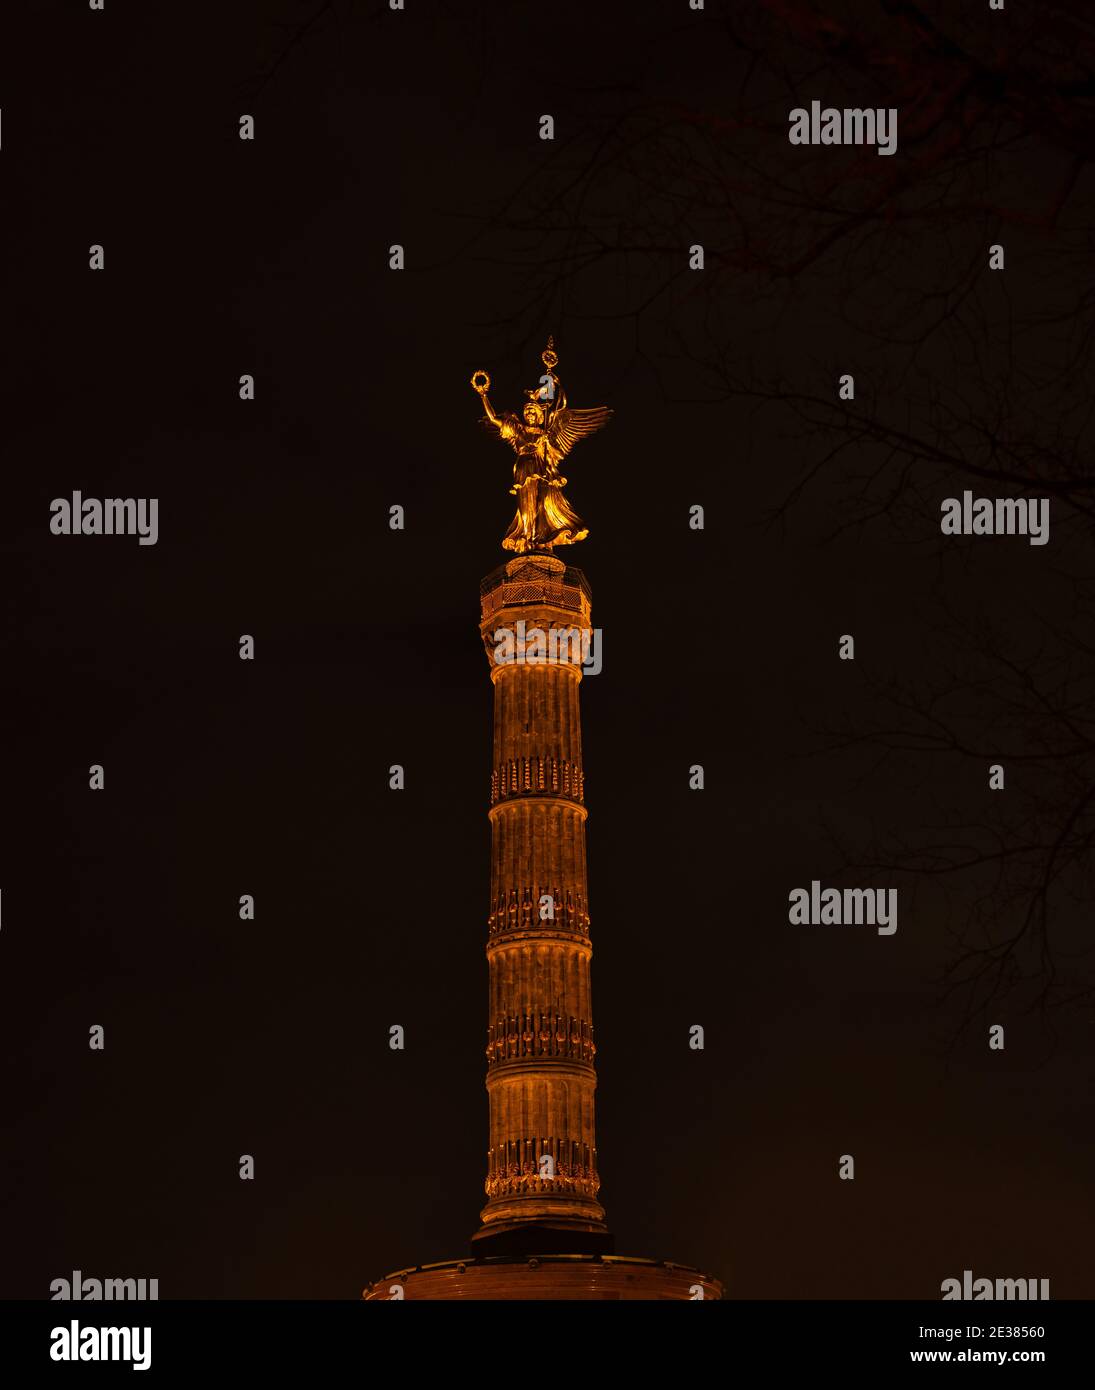 The Victory Column German Siegessäule At The Großer Stern In Berlin At Night Stock Photo